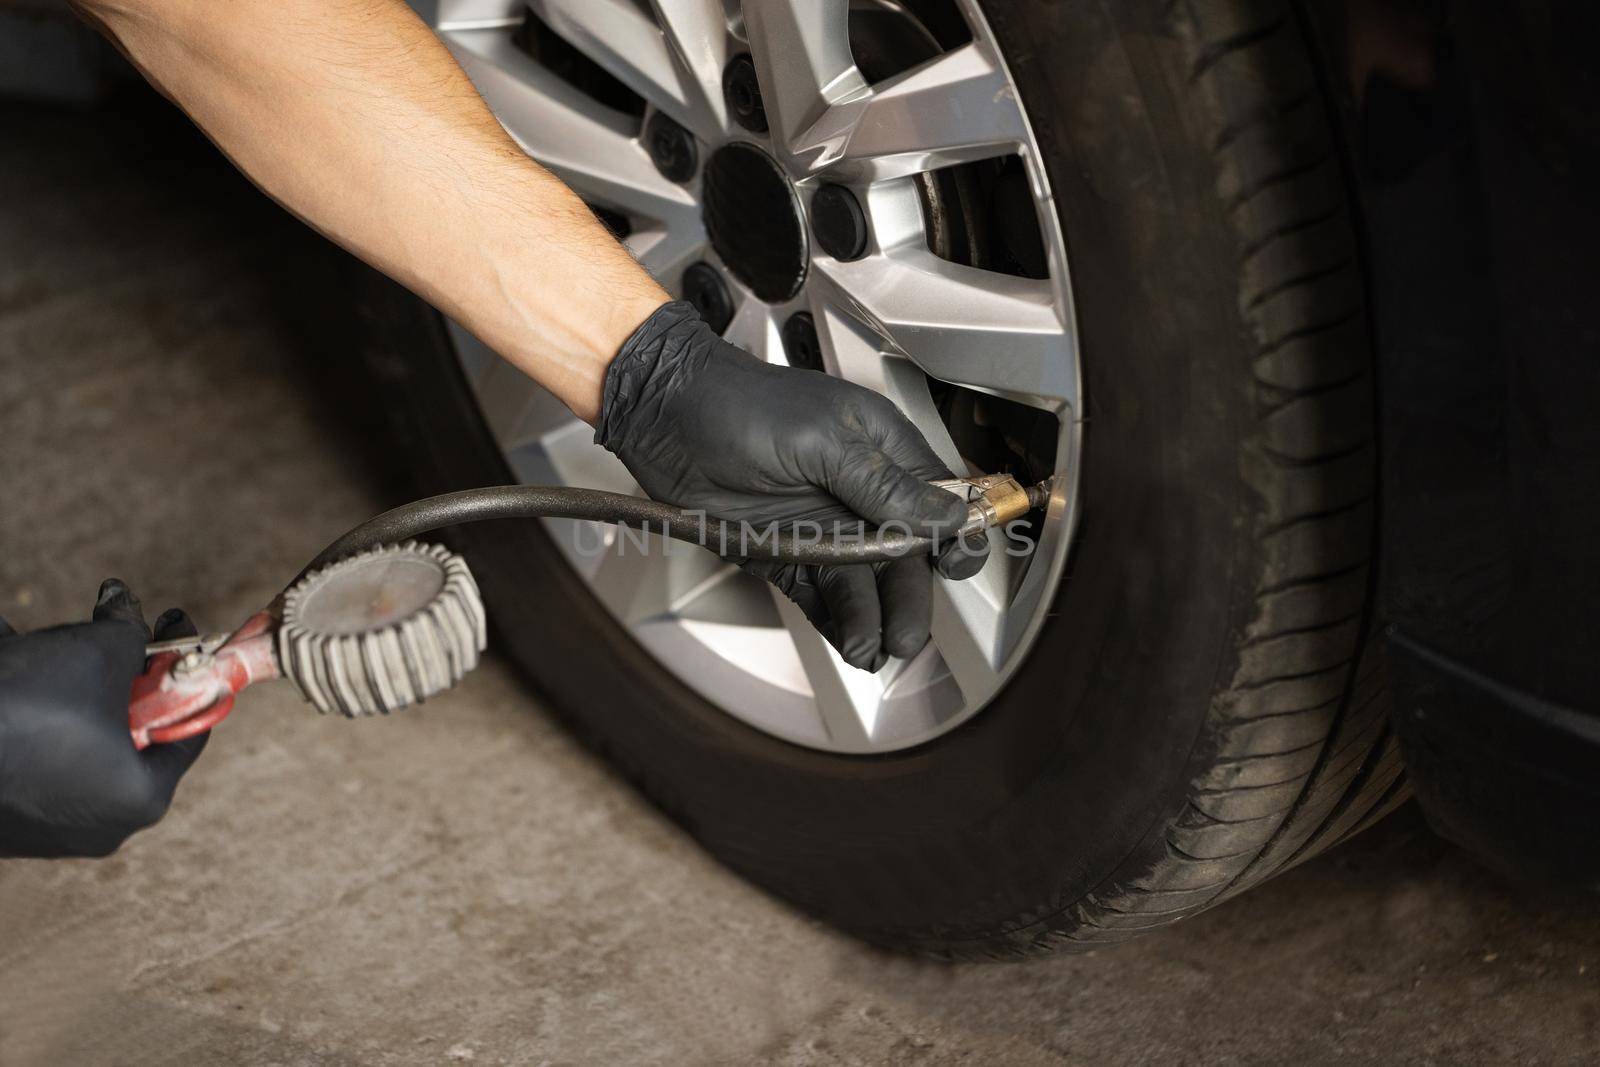 Car tire pressure check using air pressure guage. Mechanic inflating a car tire. Gas pumping of a car wheel. Car tire inflation.